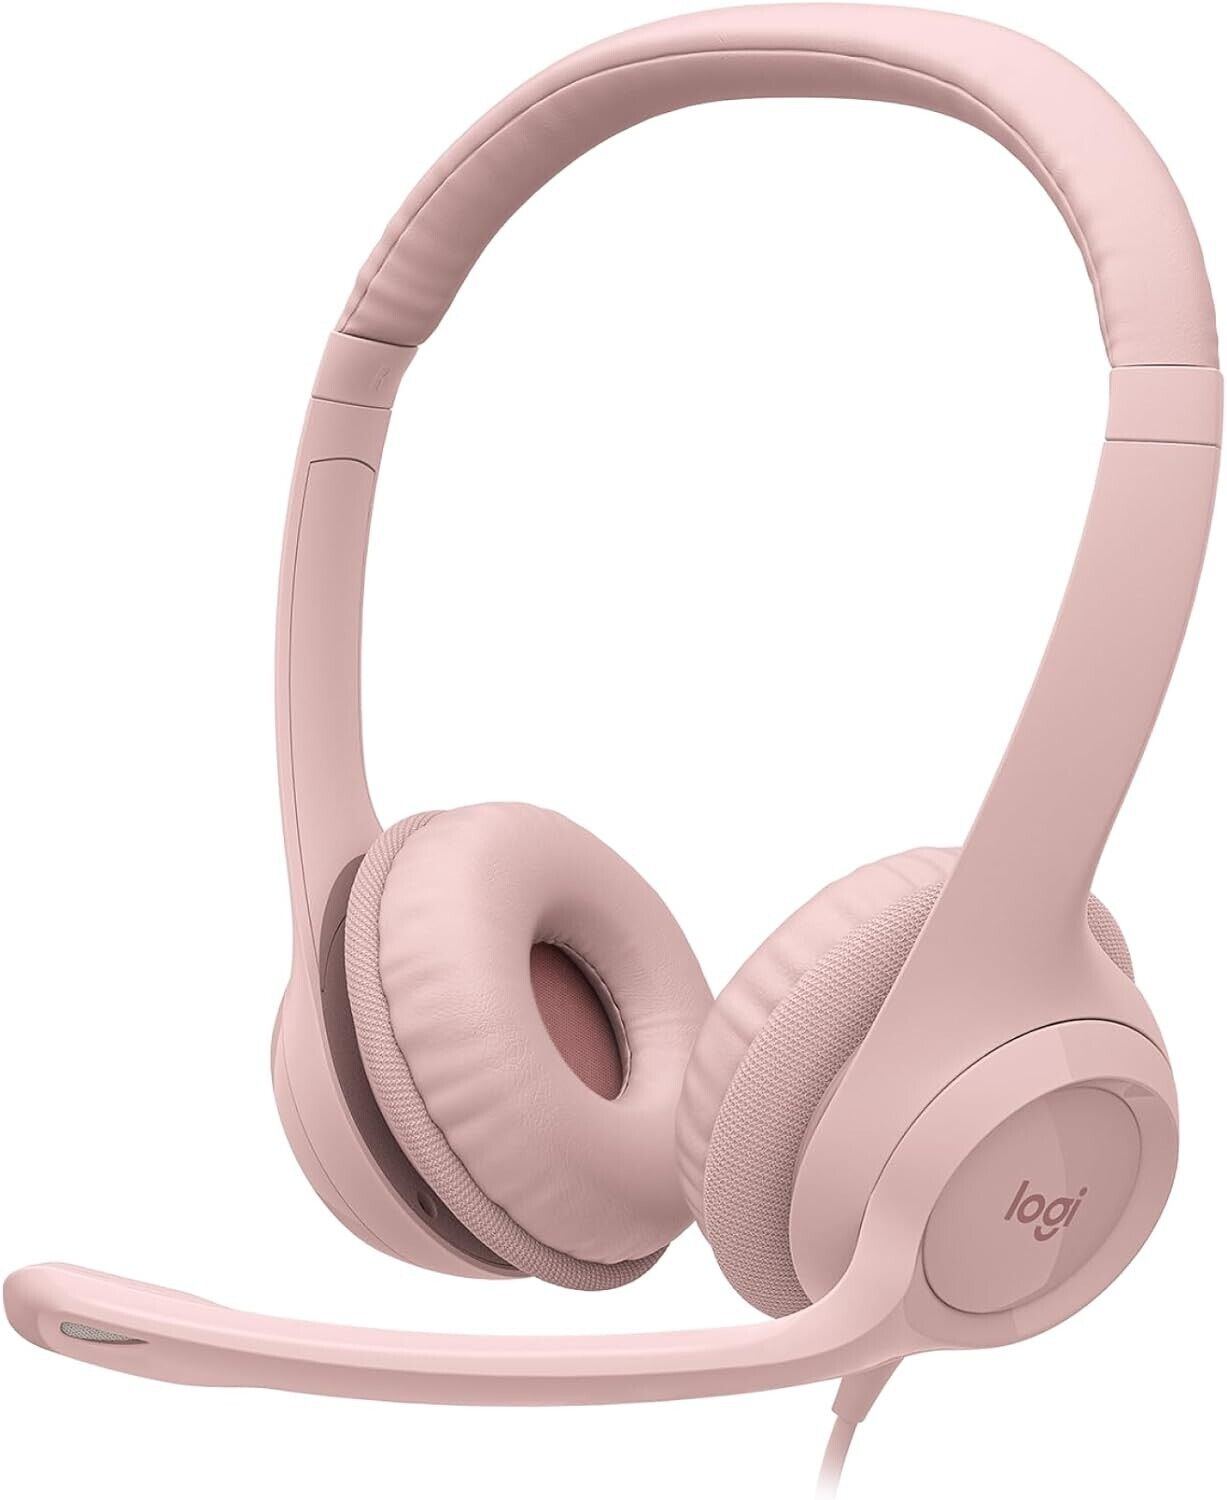 Logitech H390 Wired USB On-Ear Stereo Headphones with Mic PC Laptop Rose Pink